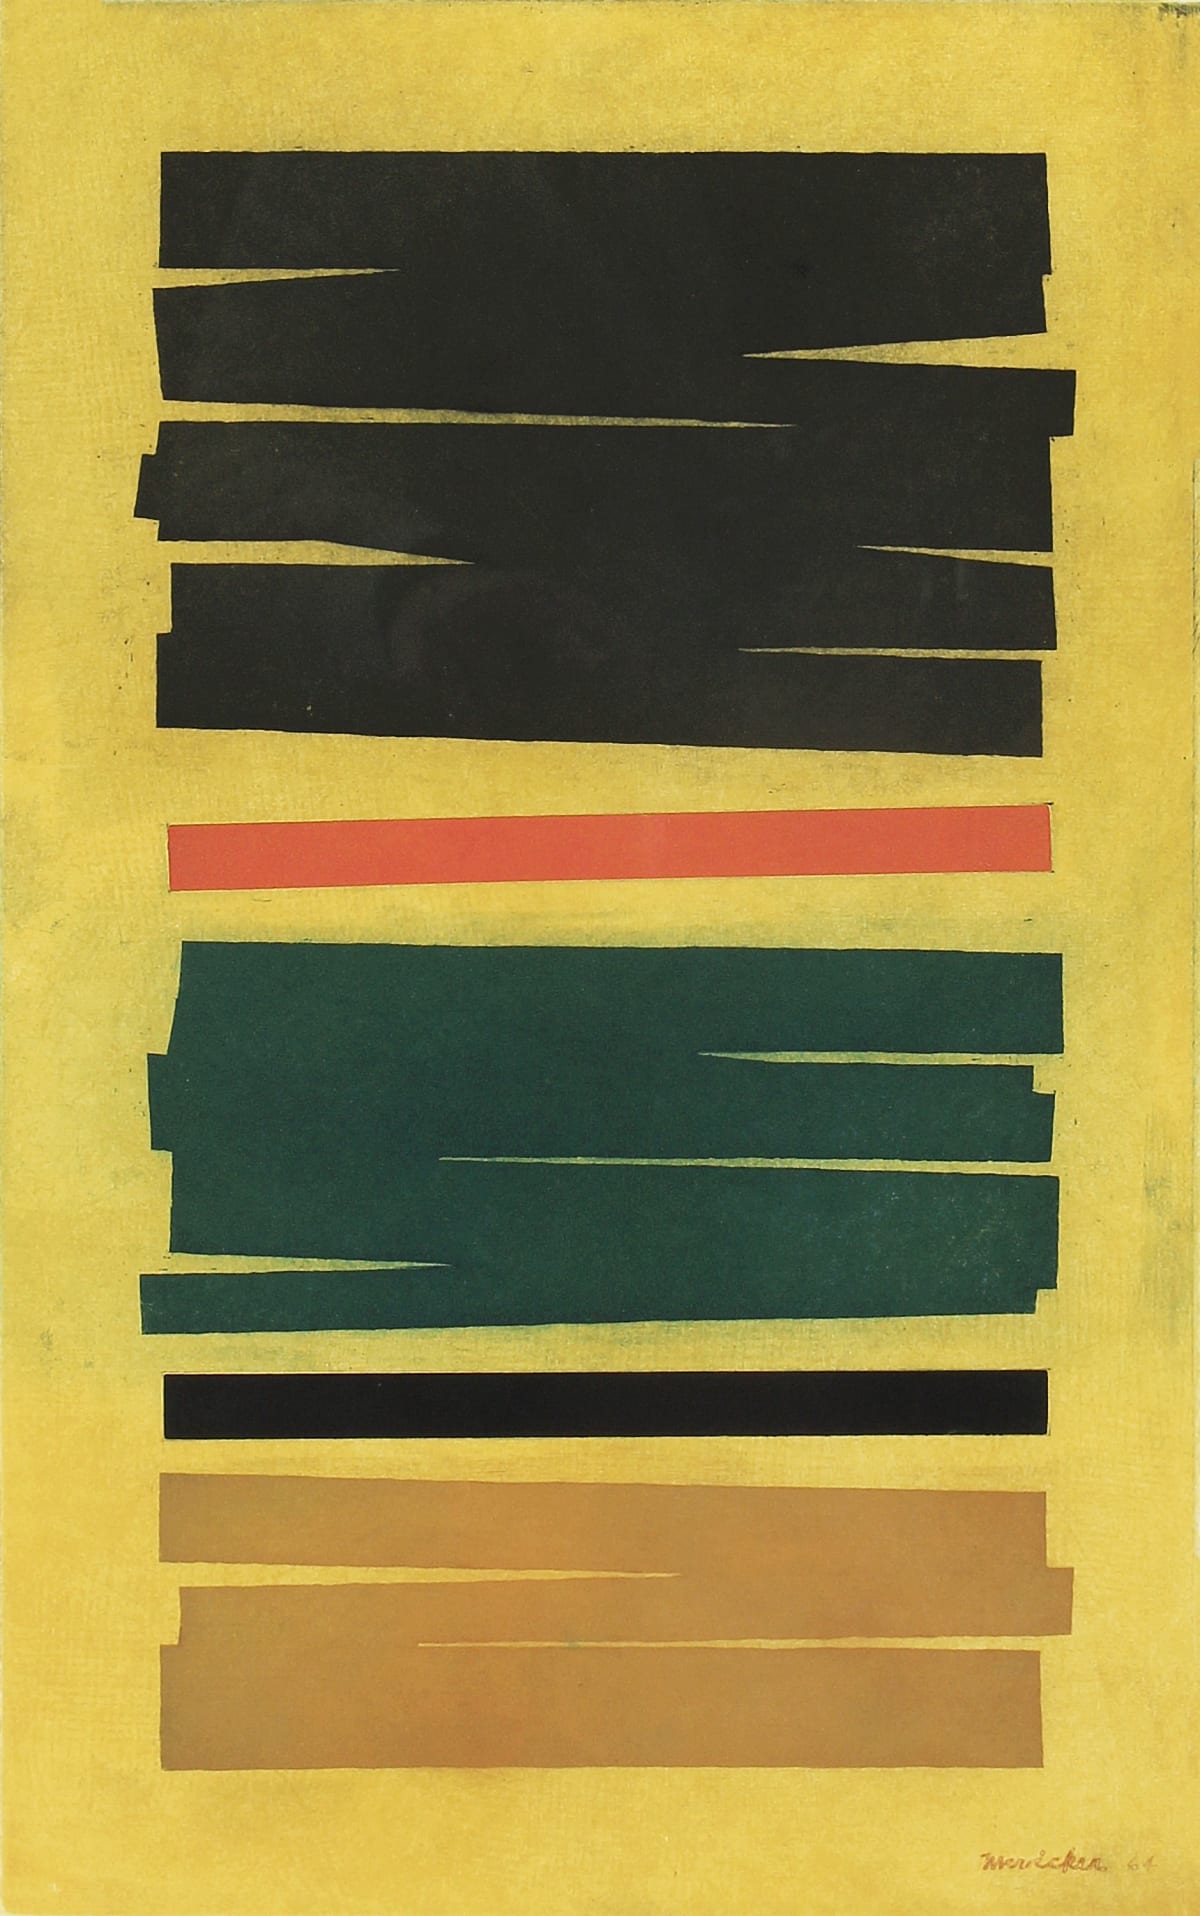 Untitled (Yellow with Horizontal Bands), 1964